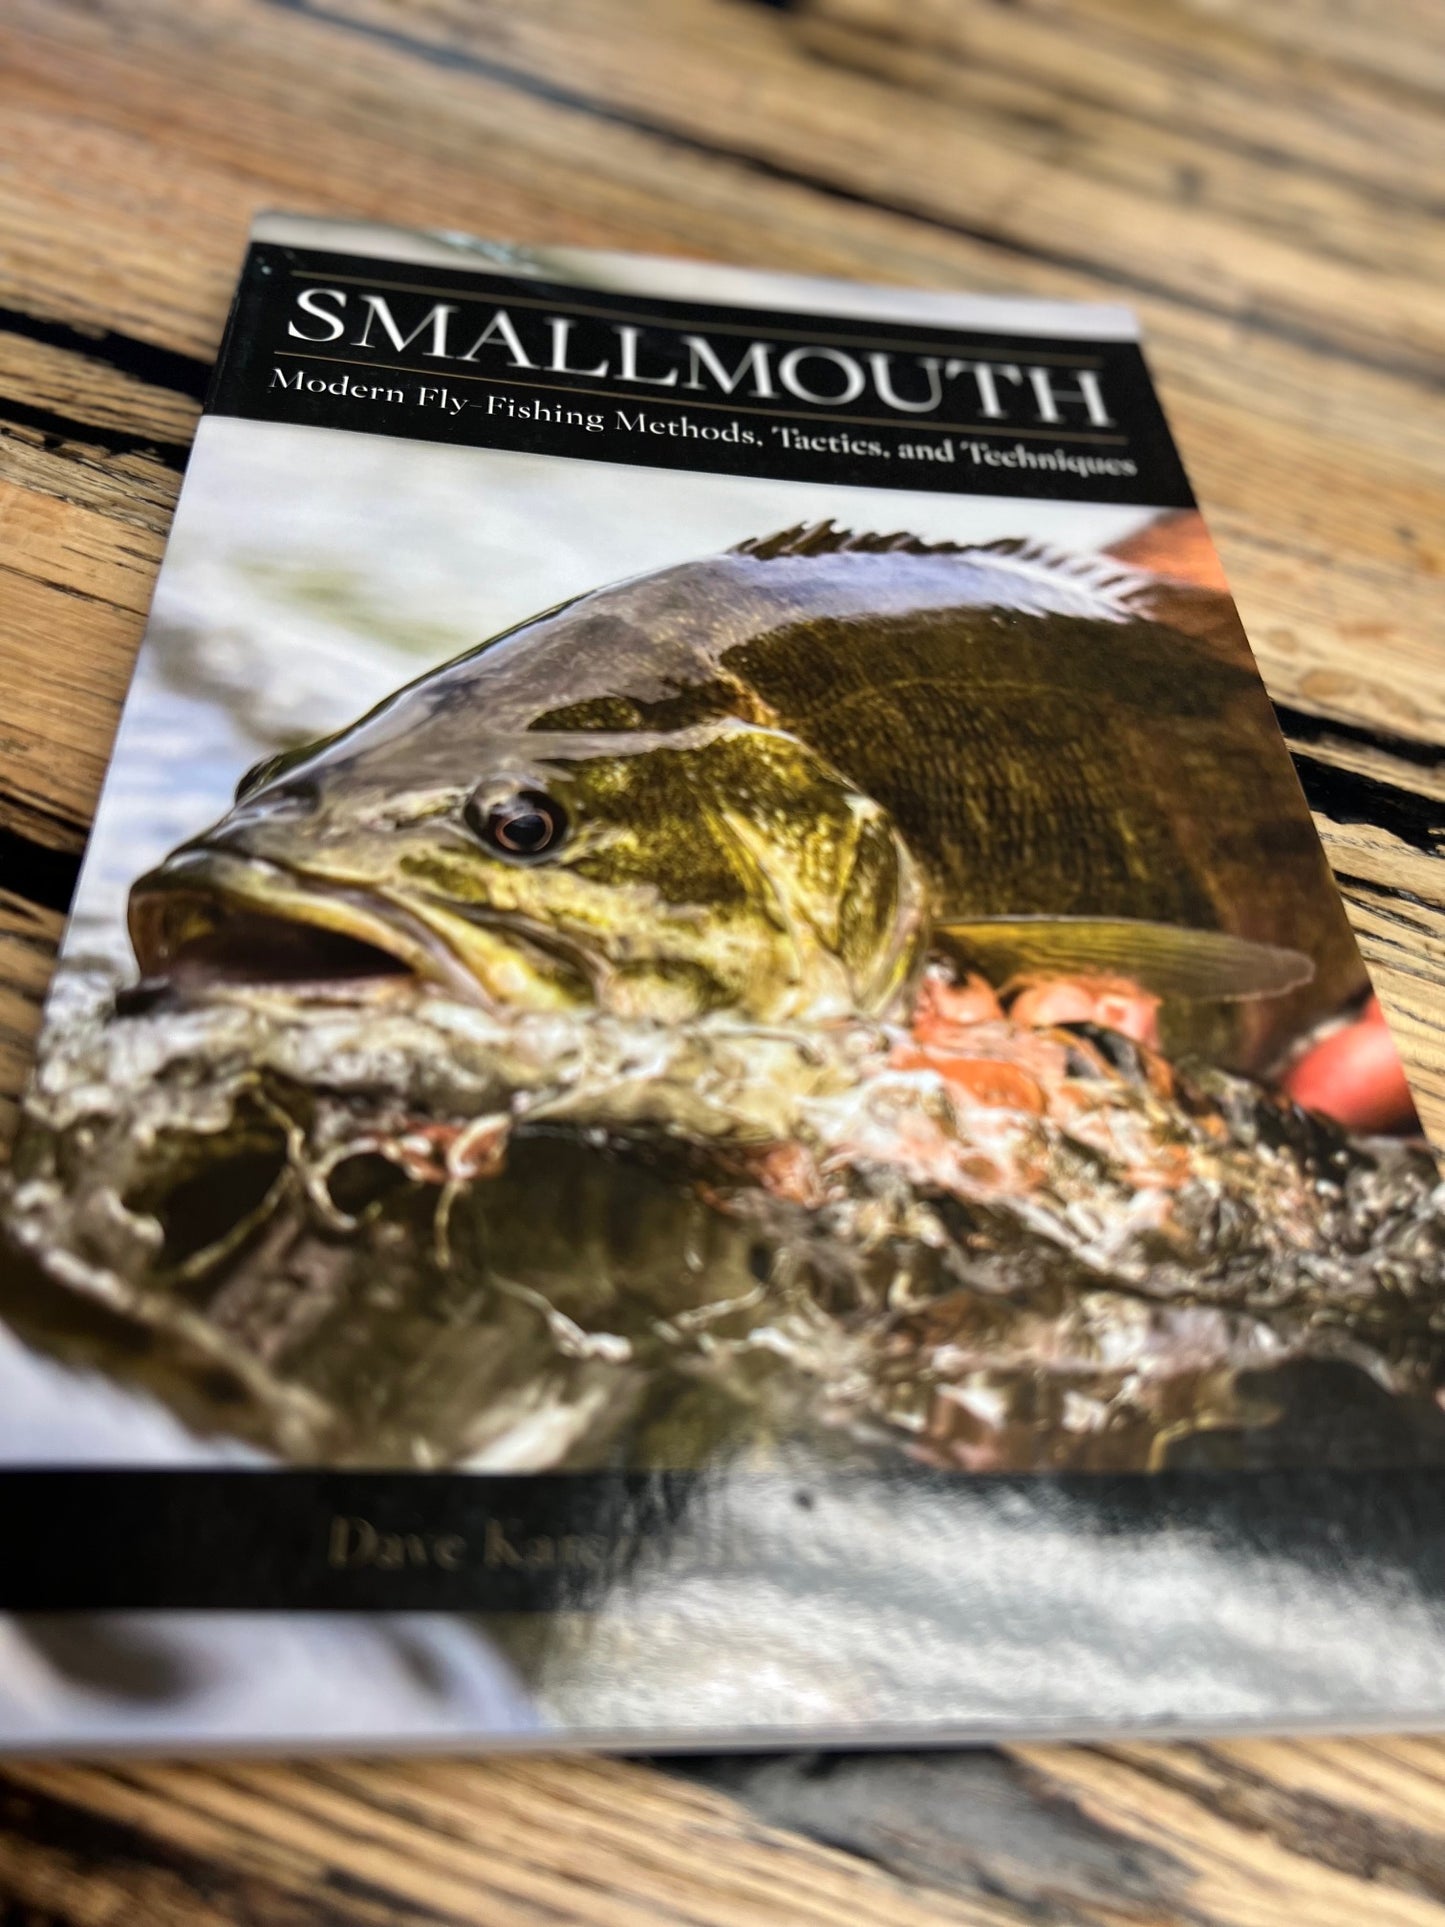 Smallmouth: Modern Fly Fishing Methods, Tactics, and Techniques, by Dave Karezynski & Tim Landwehr